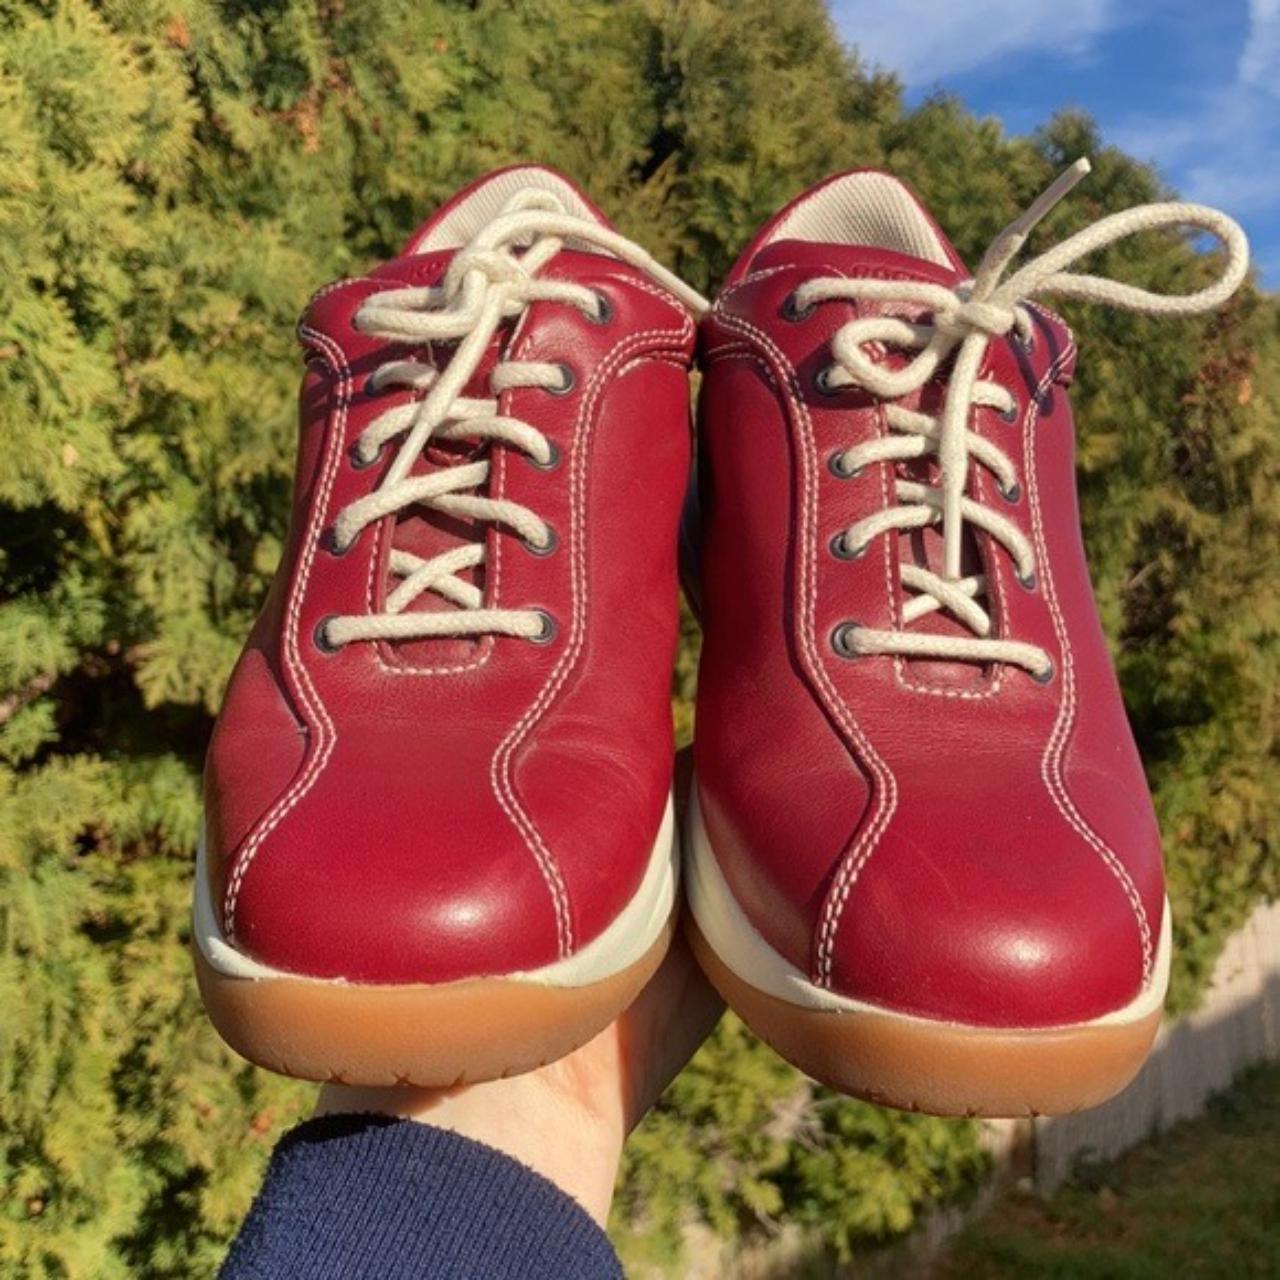 Product Image 2 - Rockport Red Leather Women’s Sneaker